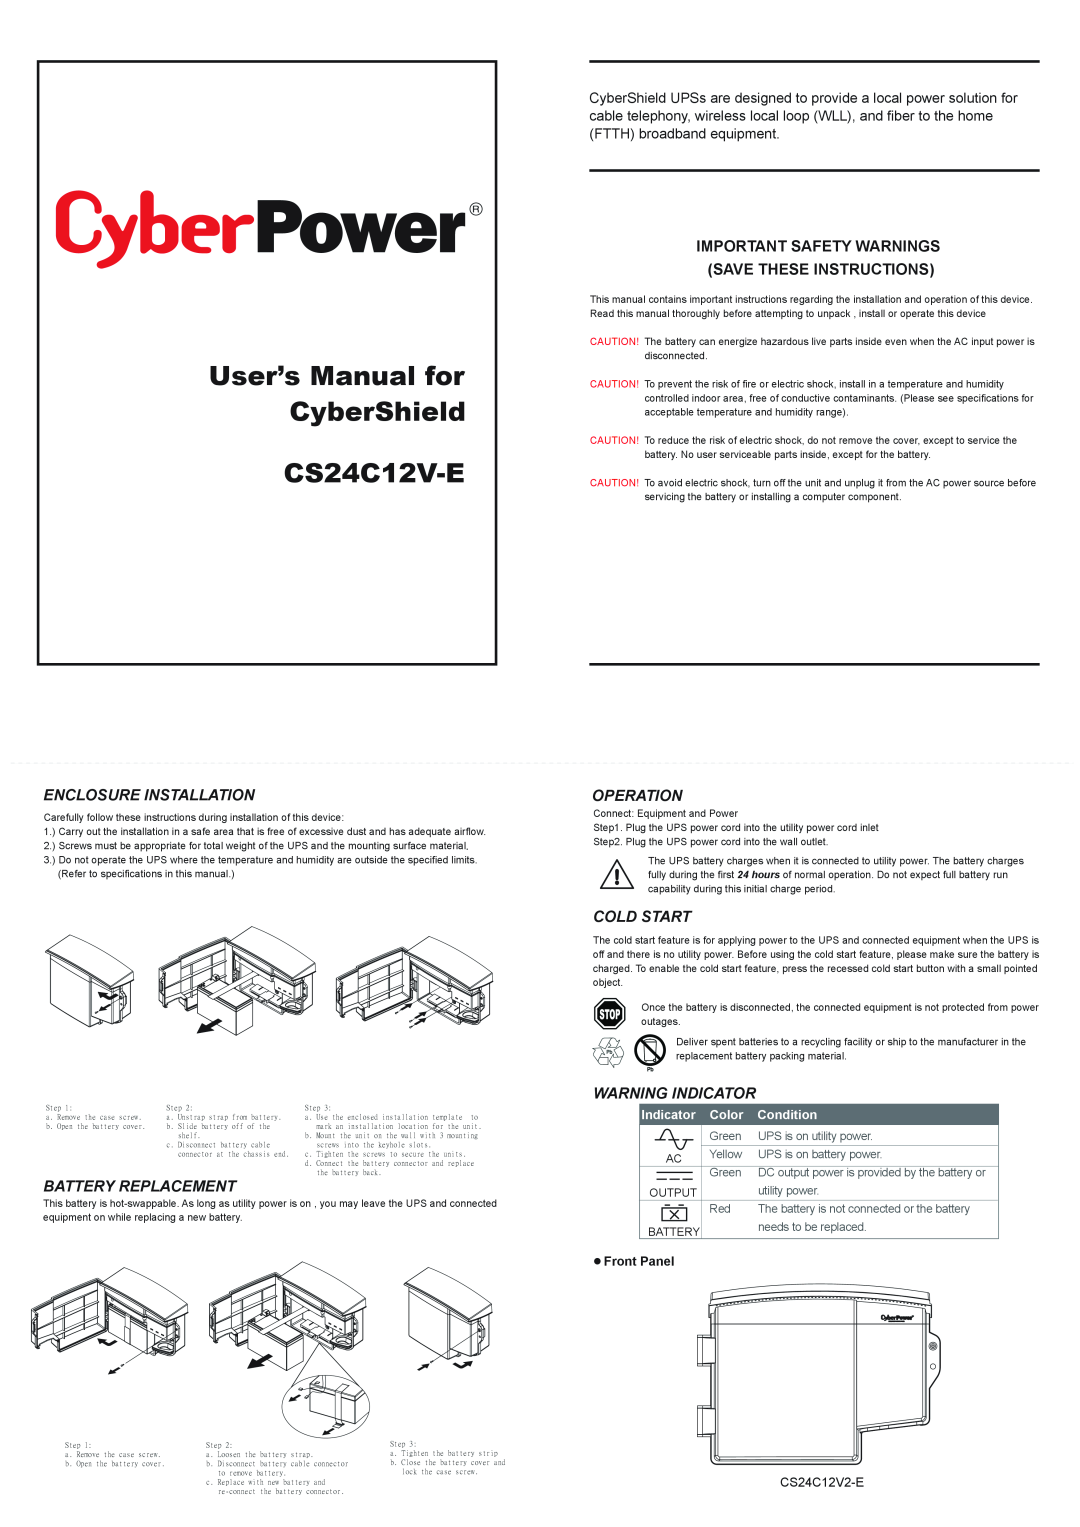 CyberPower Systems CS24C12V-E user manual Enclosure Installation, Operation, Battery Replacement, Cold Start, Green 